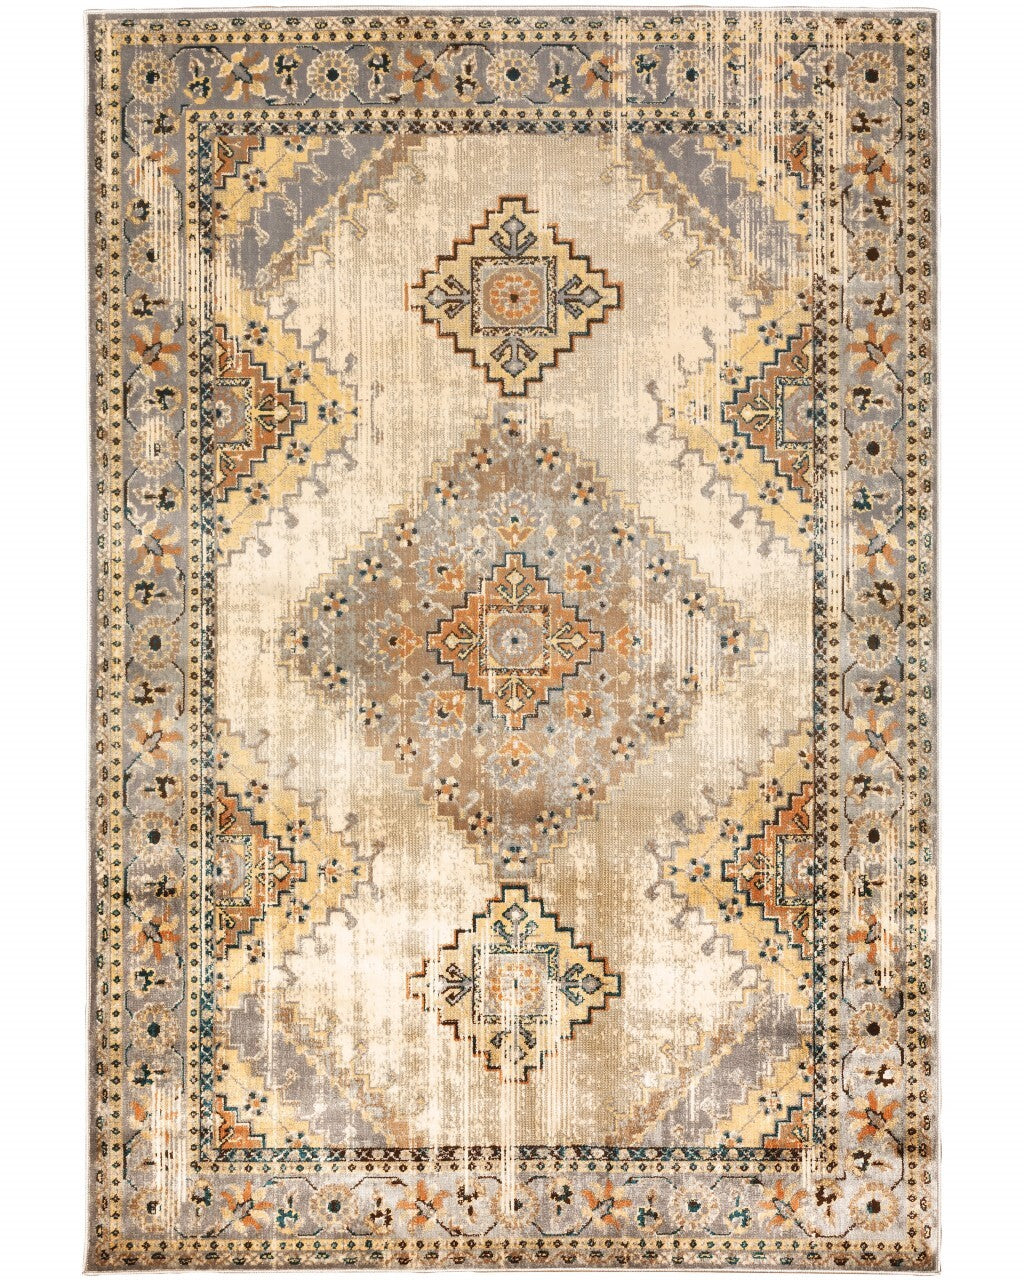 8' x 10' Gray and Beige Aztec Pattern Area Rug